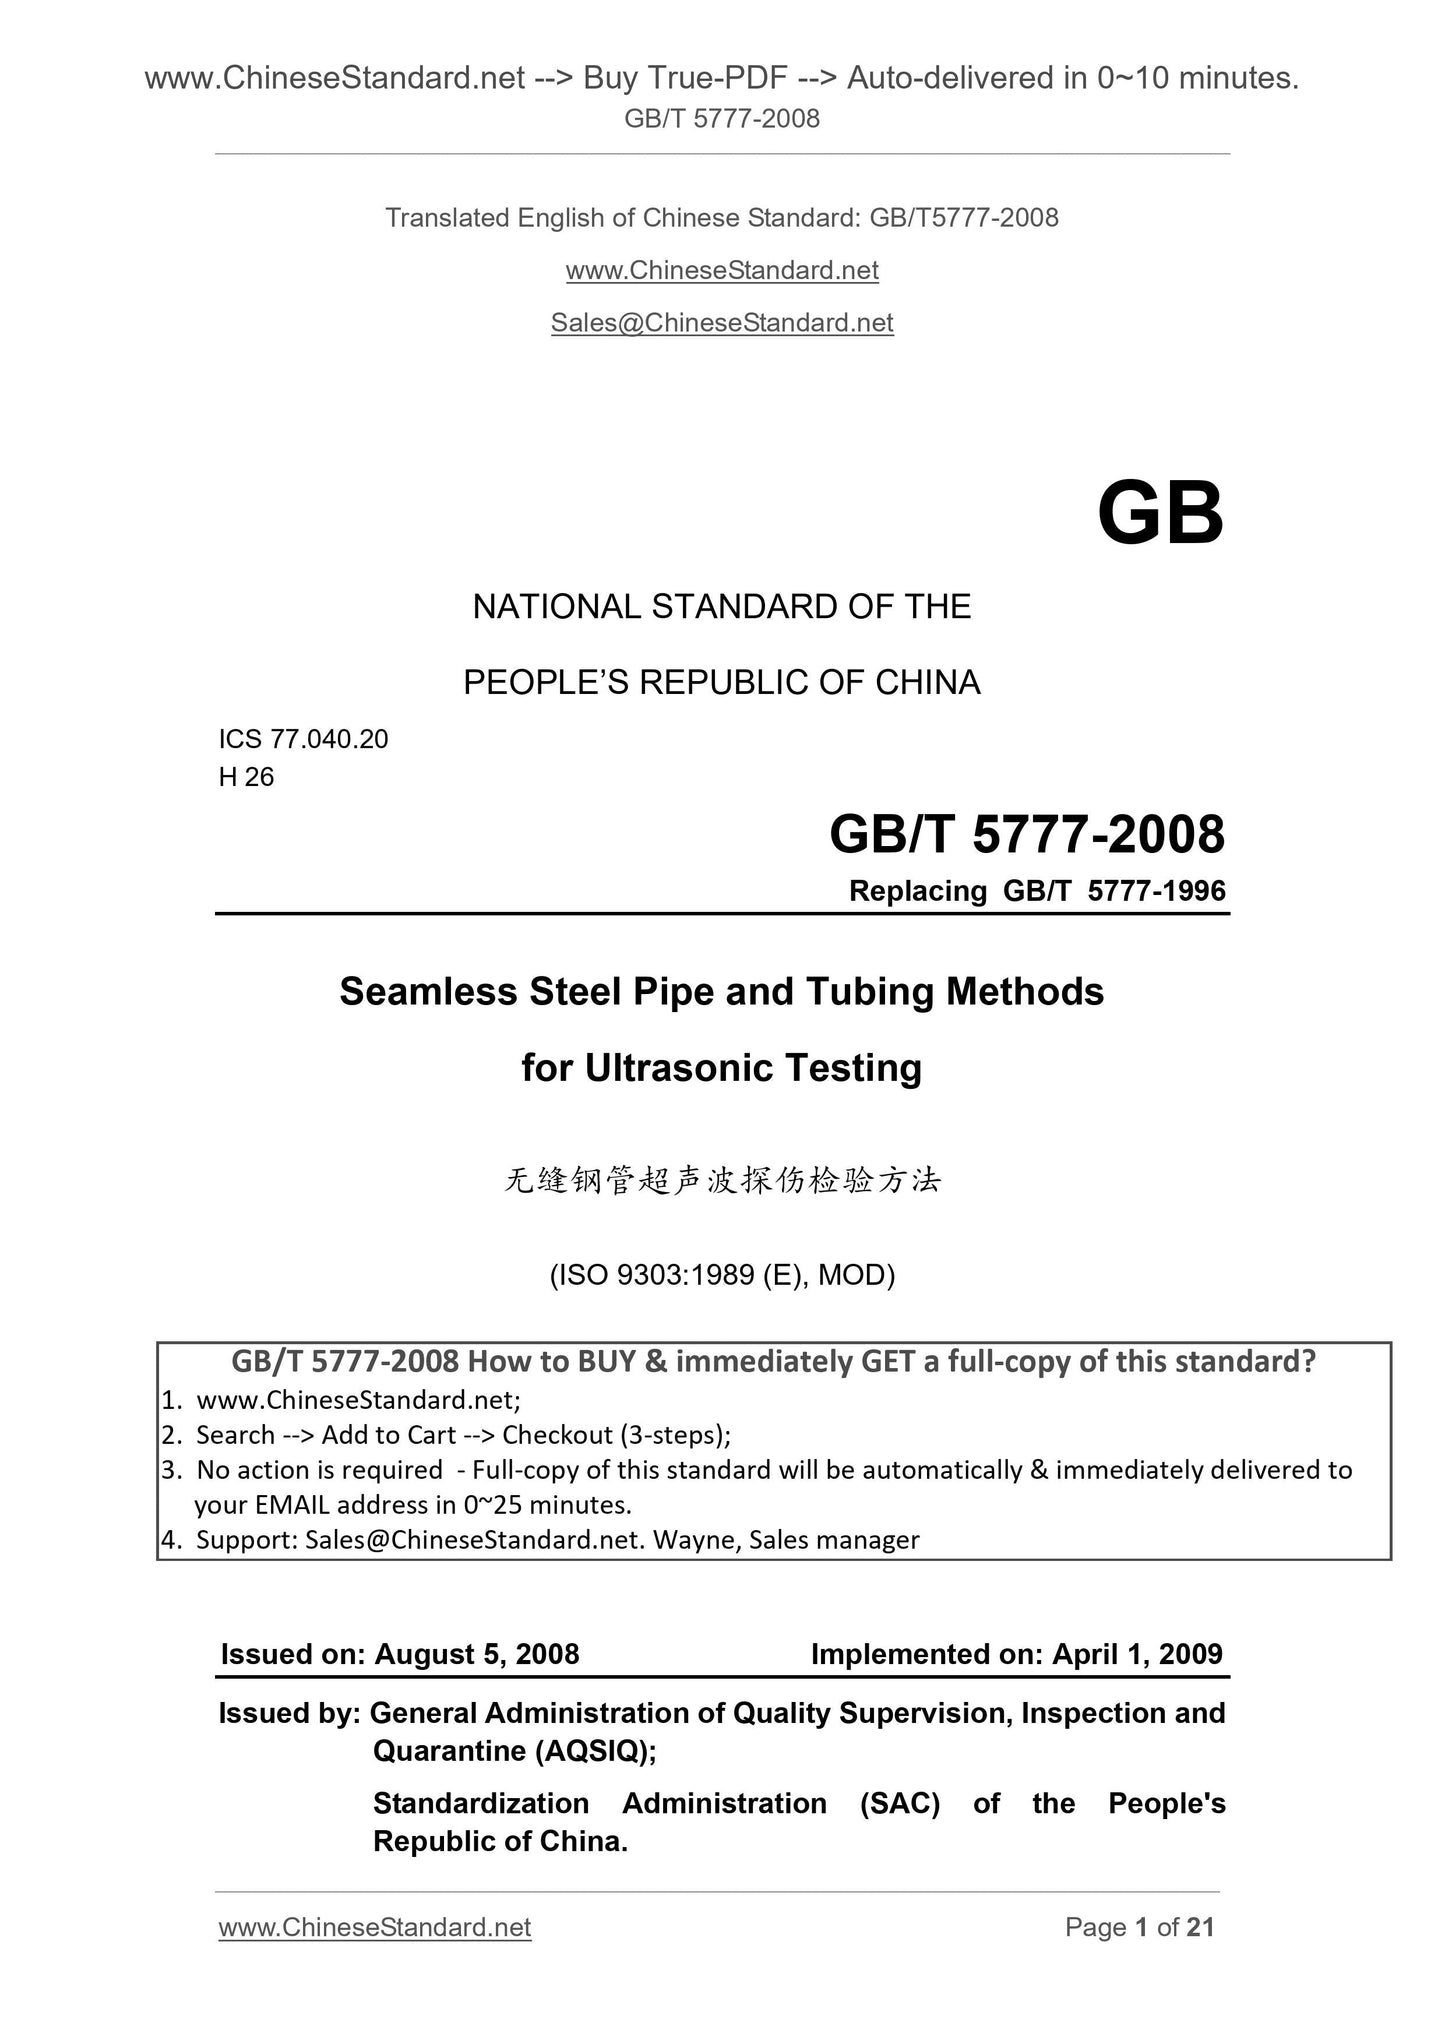 GB/T 5777-2008 Page 1